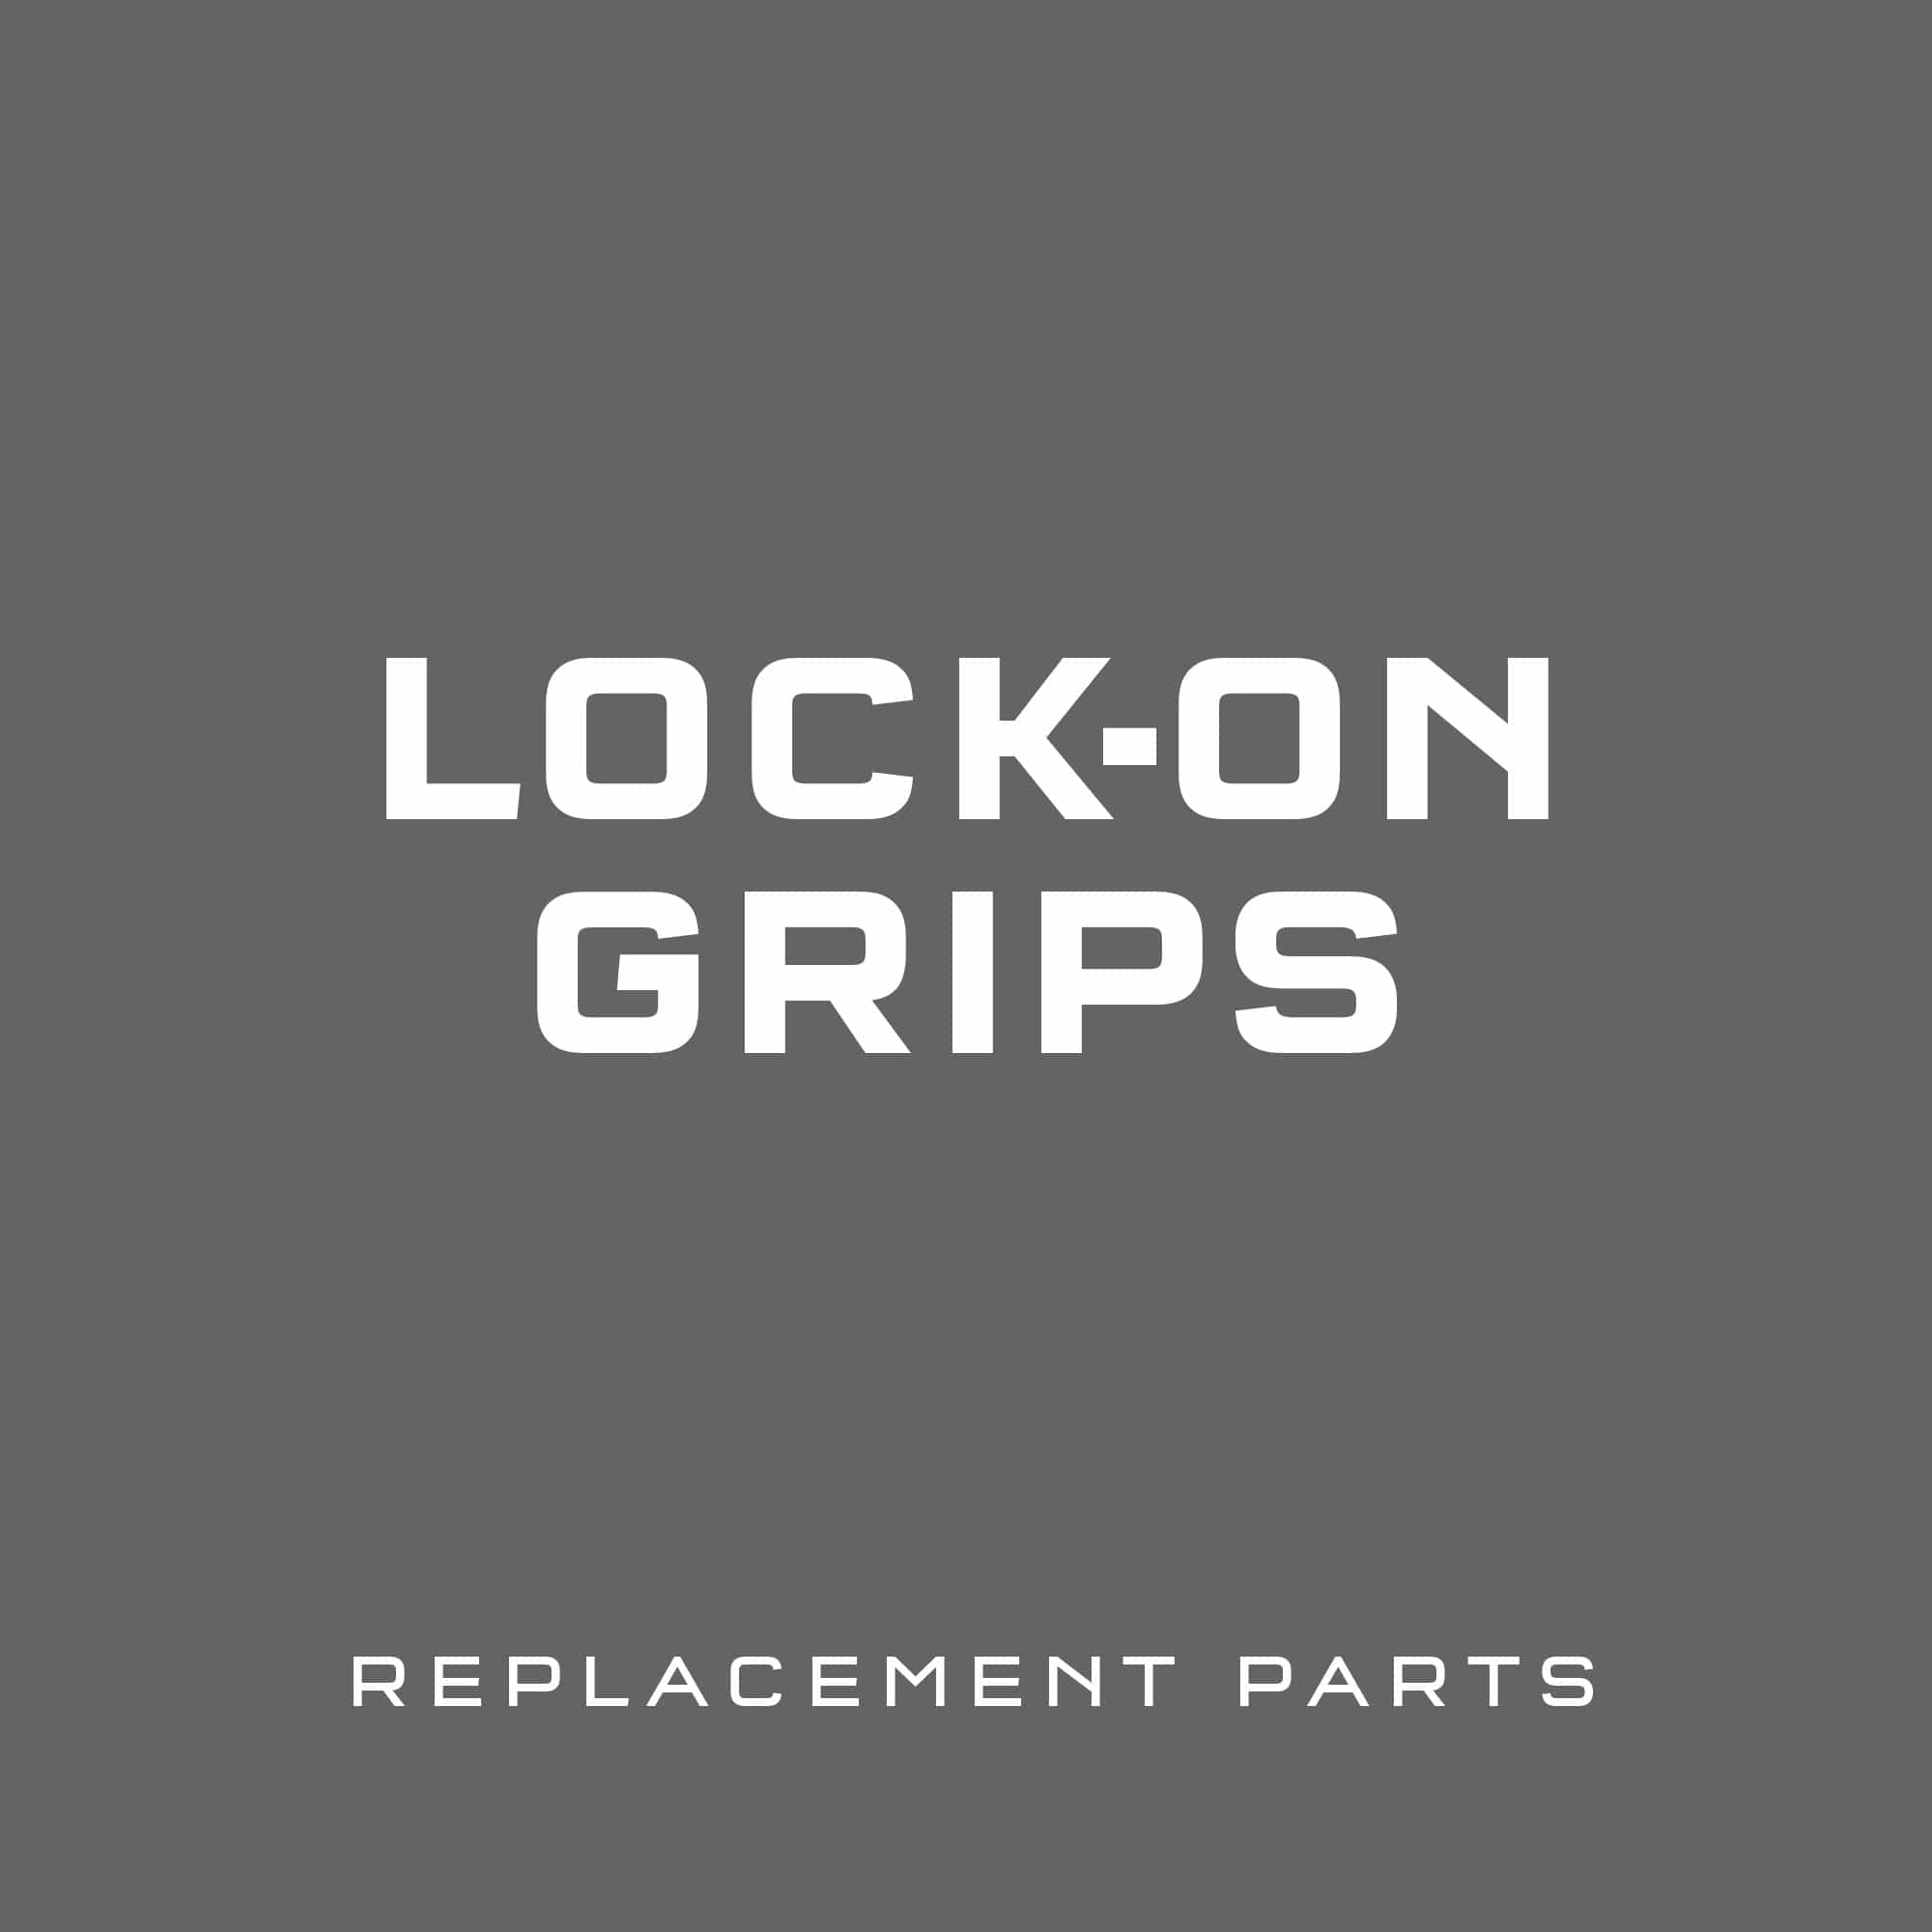 Lock-on Grip Replacement Parts